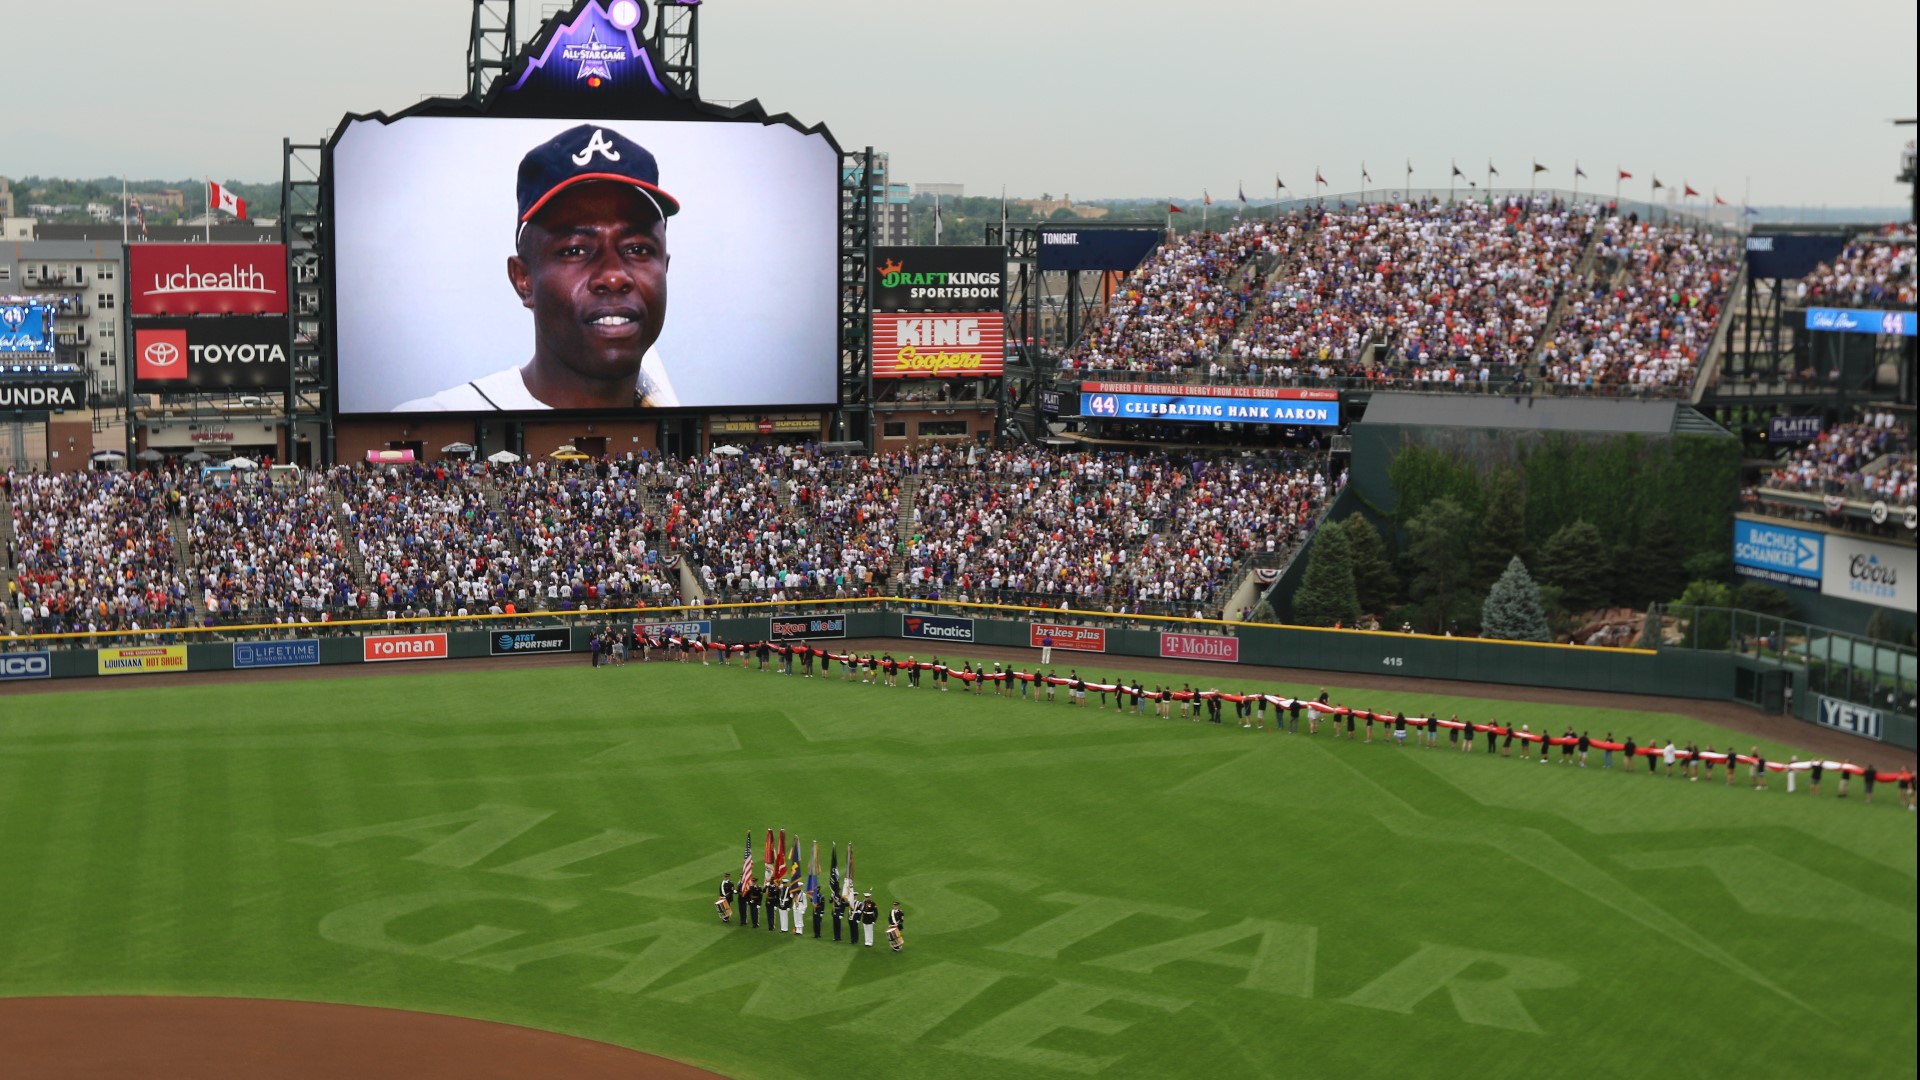 The baseball legend was honored at the 2021 MLB All-Star Game.